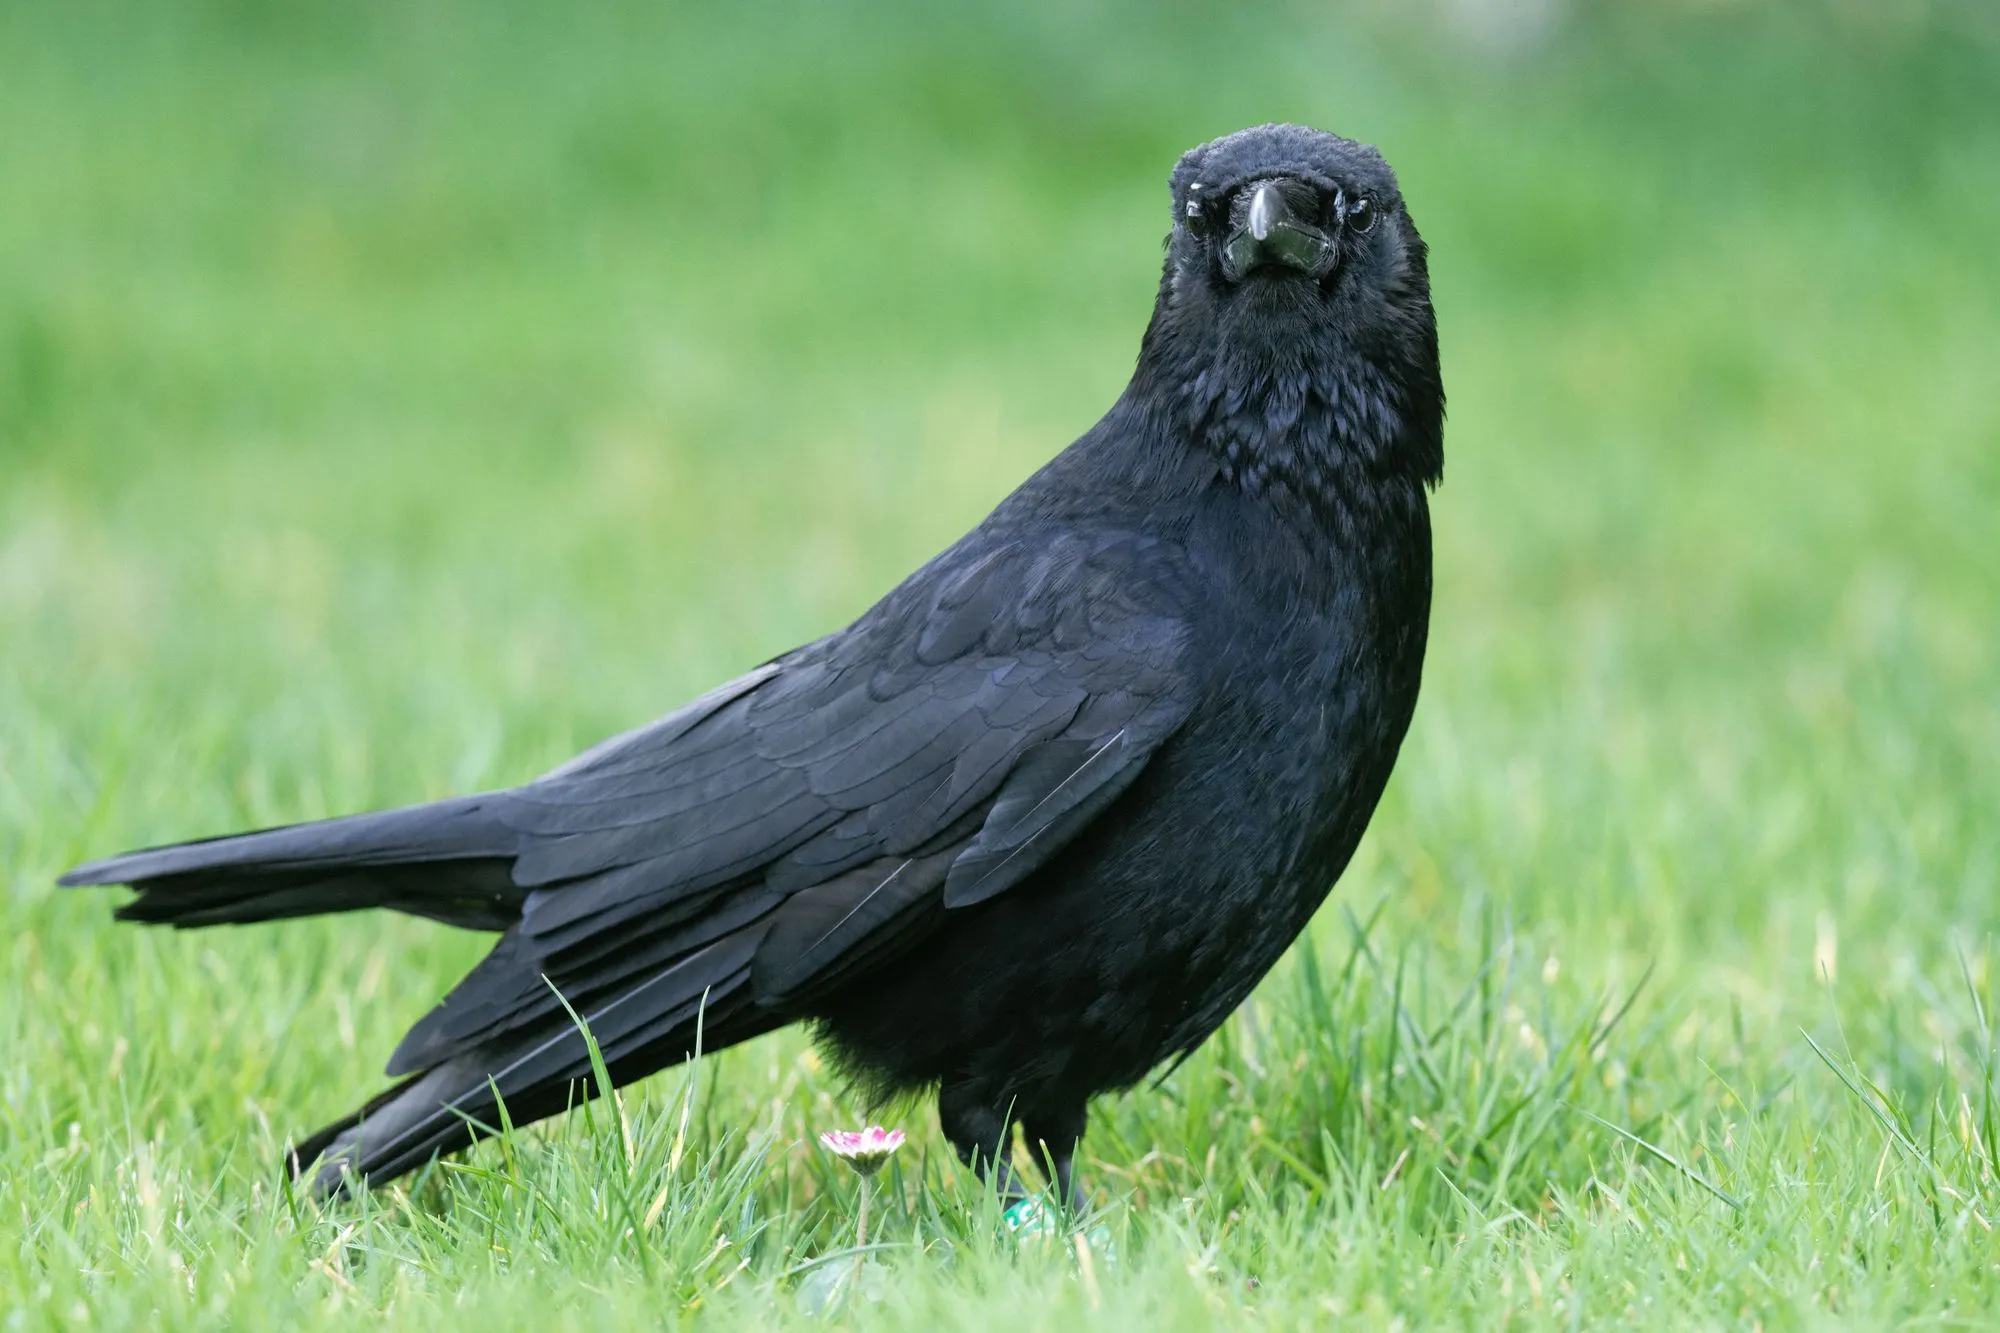 The piping crow has a black body with a white neck.